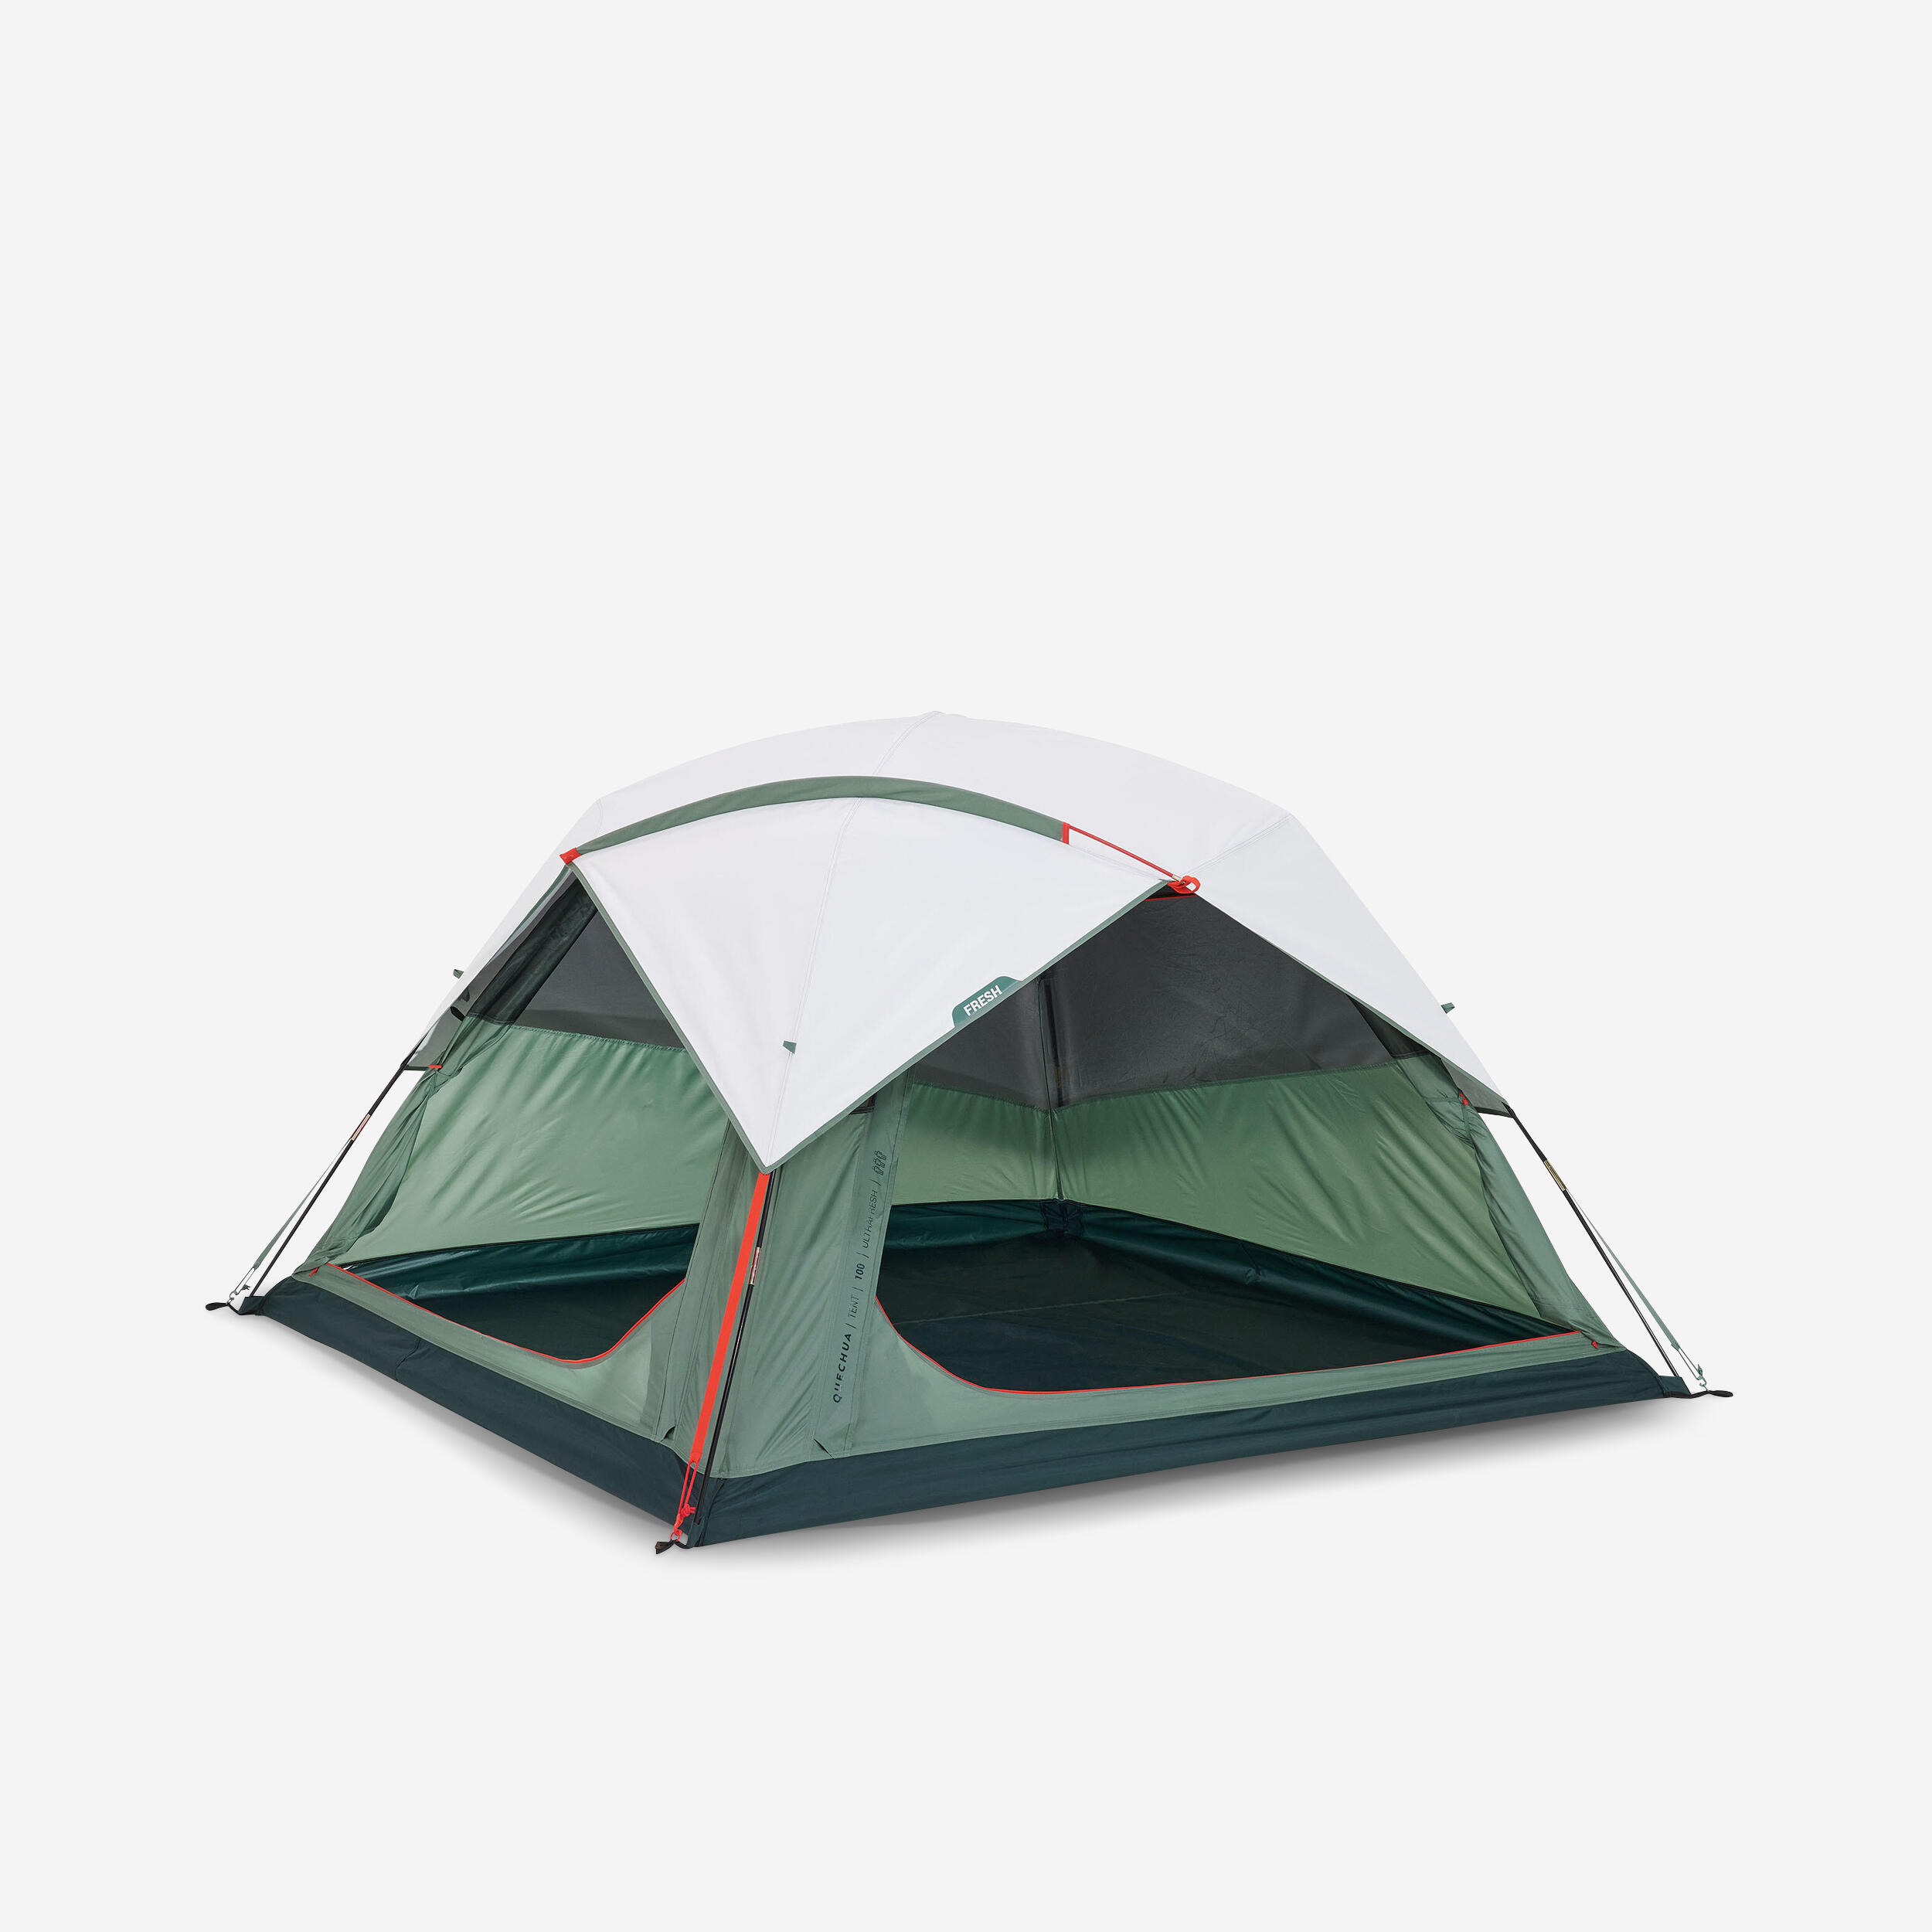 Camping tent - MH100  - 3-person - Fresh 1/24